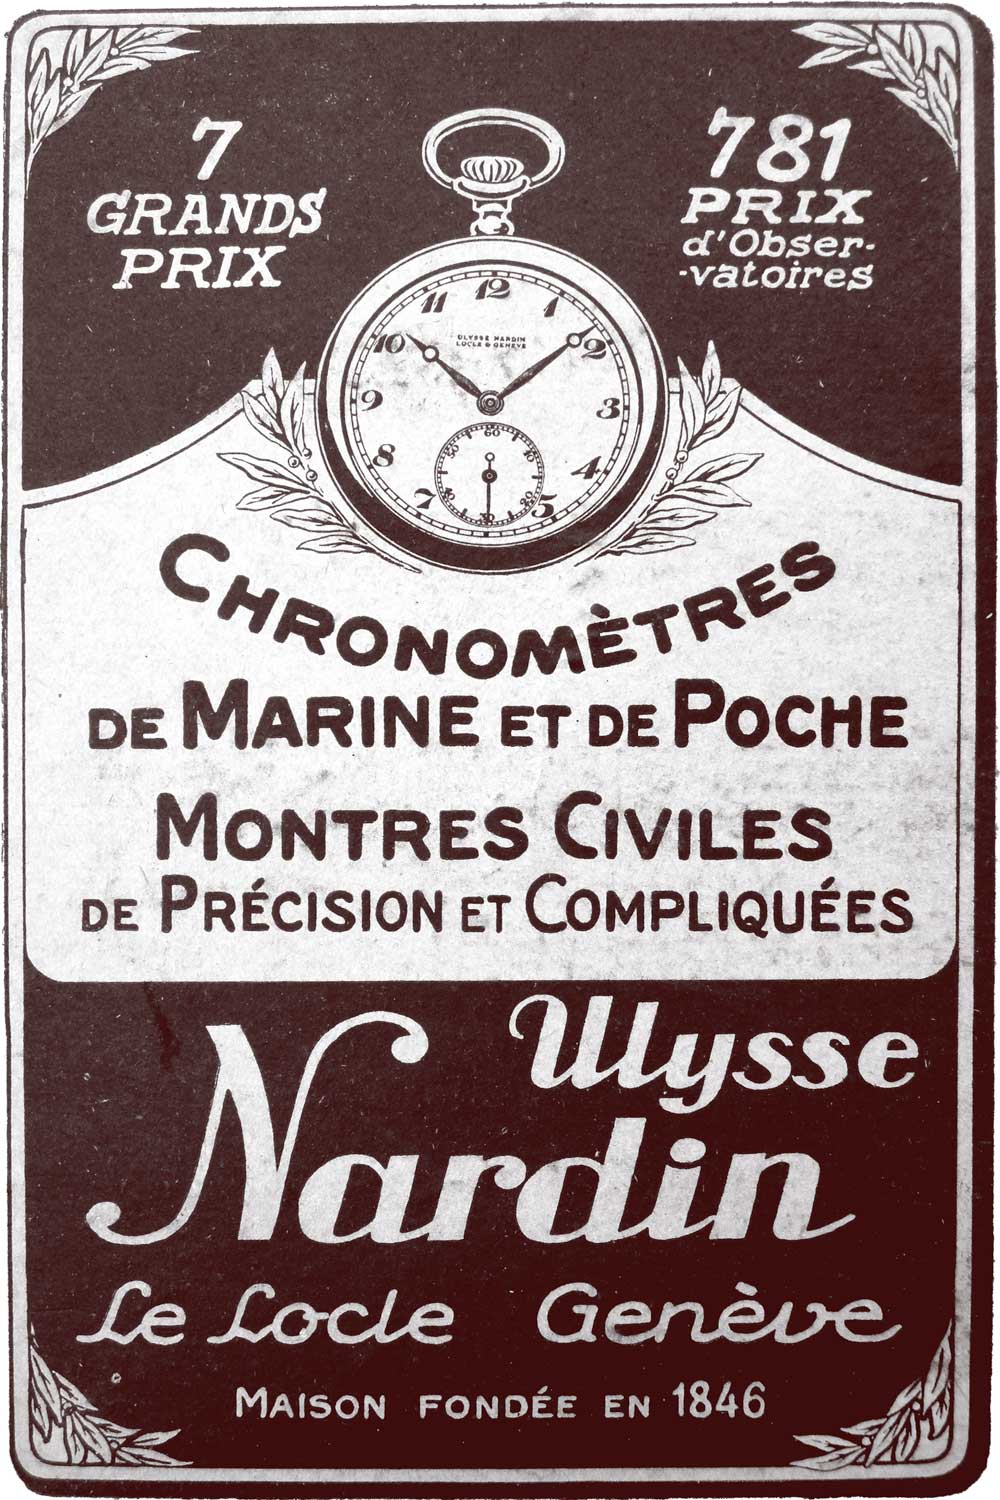 An old advertisement for Ulysse Nardin’s chronometers